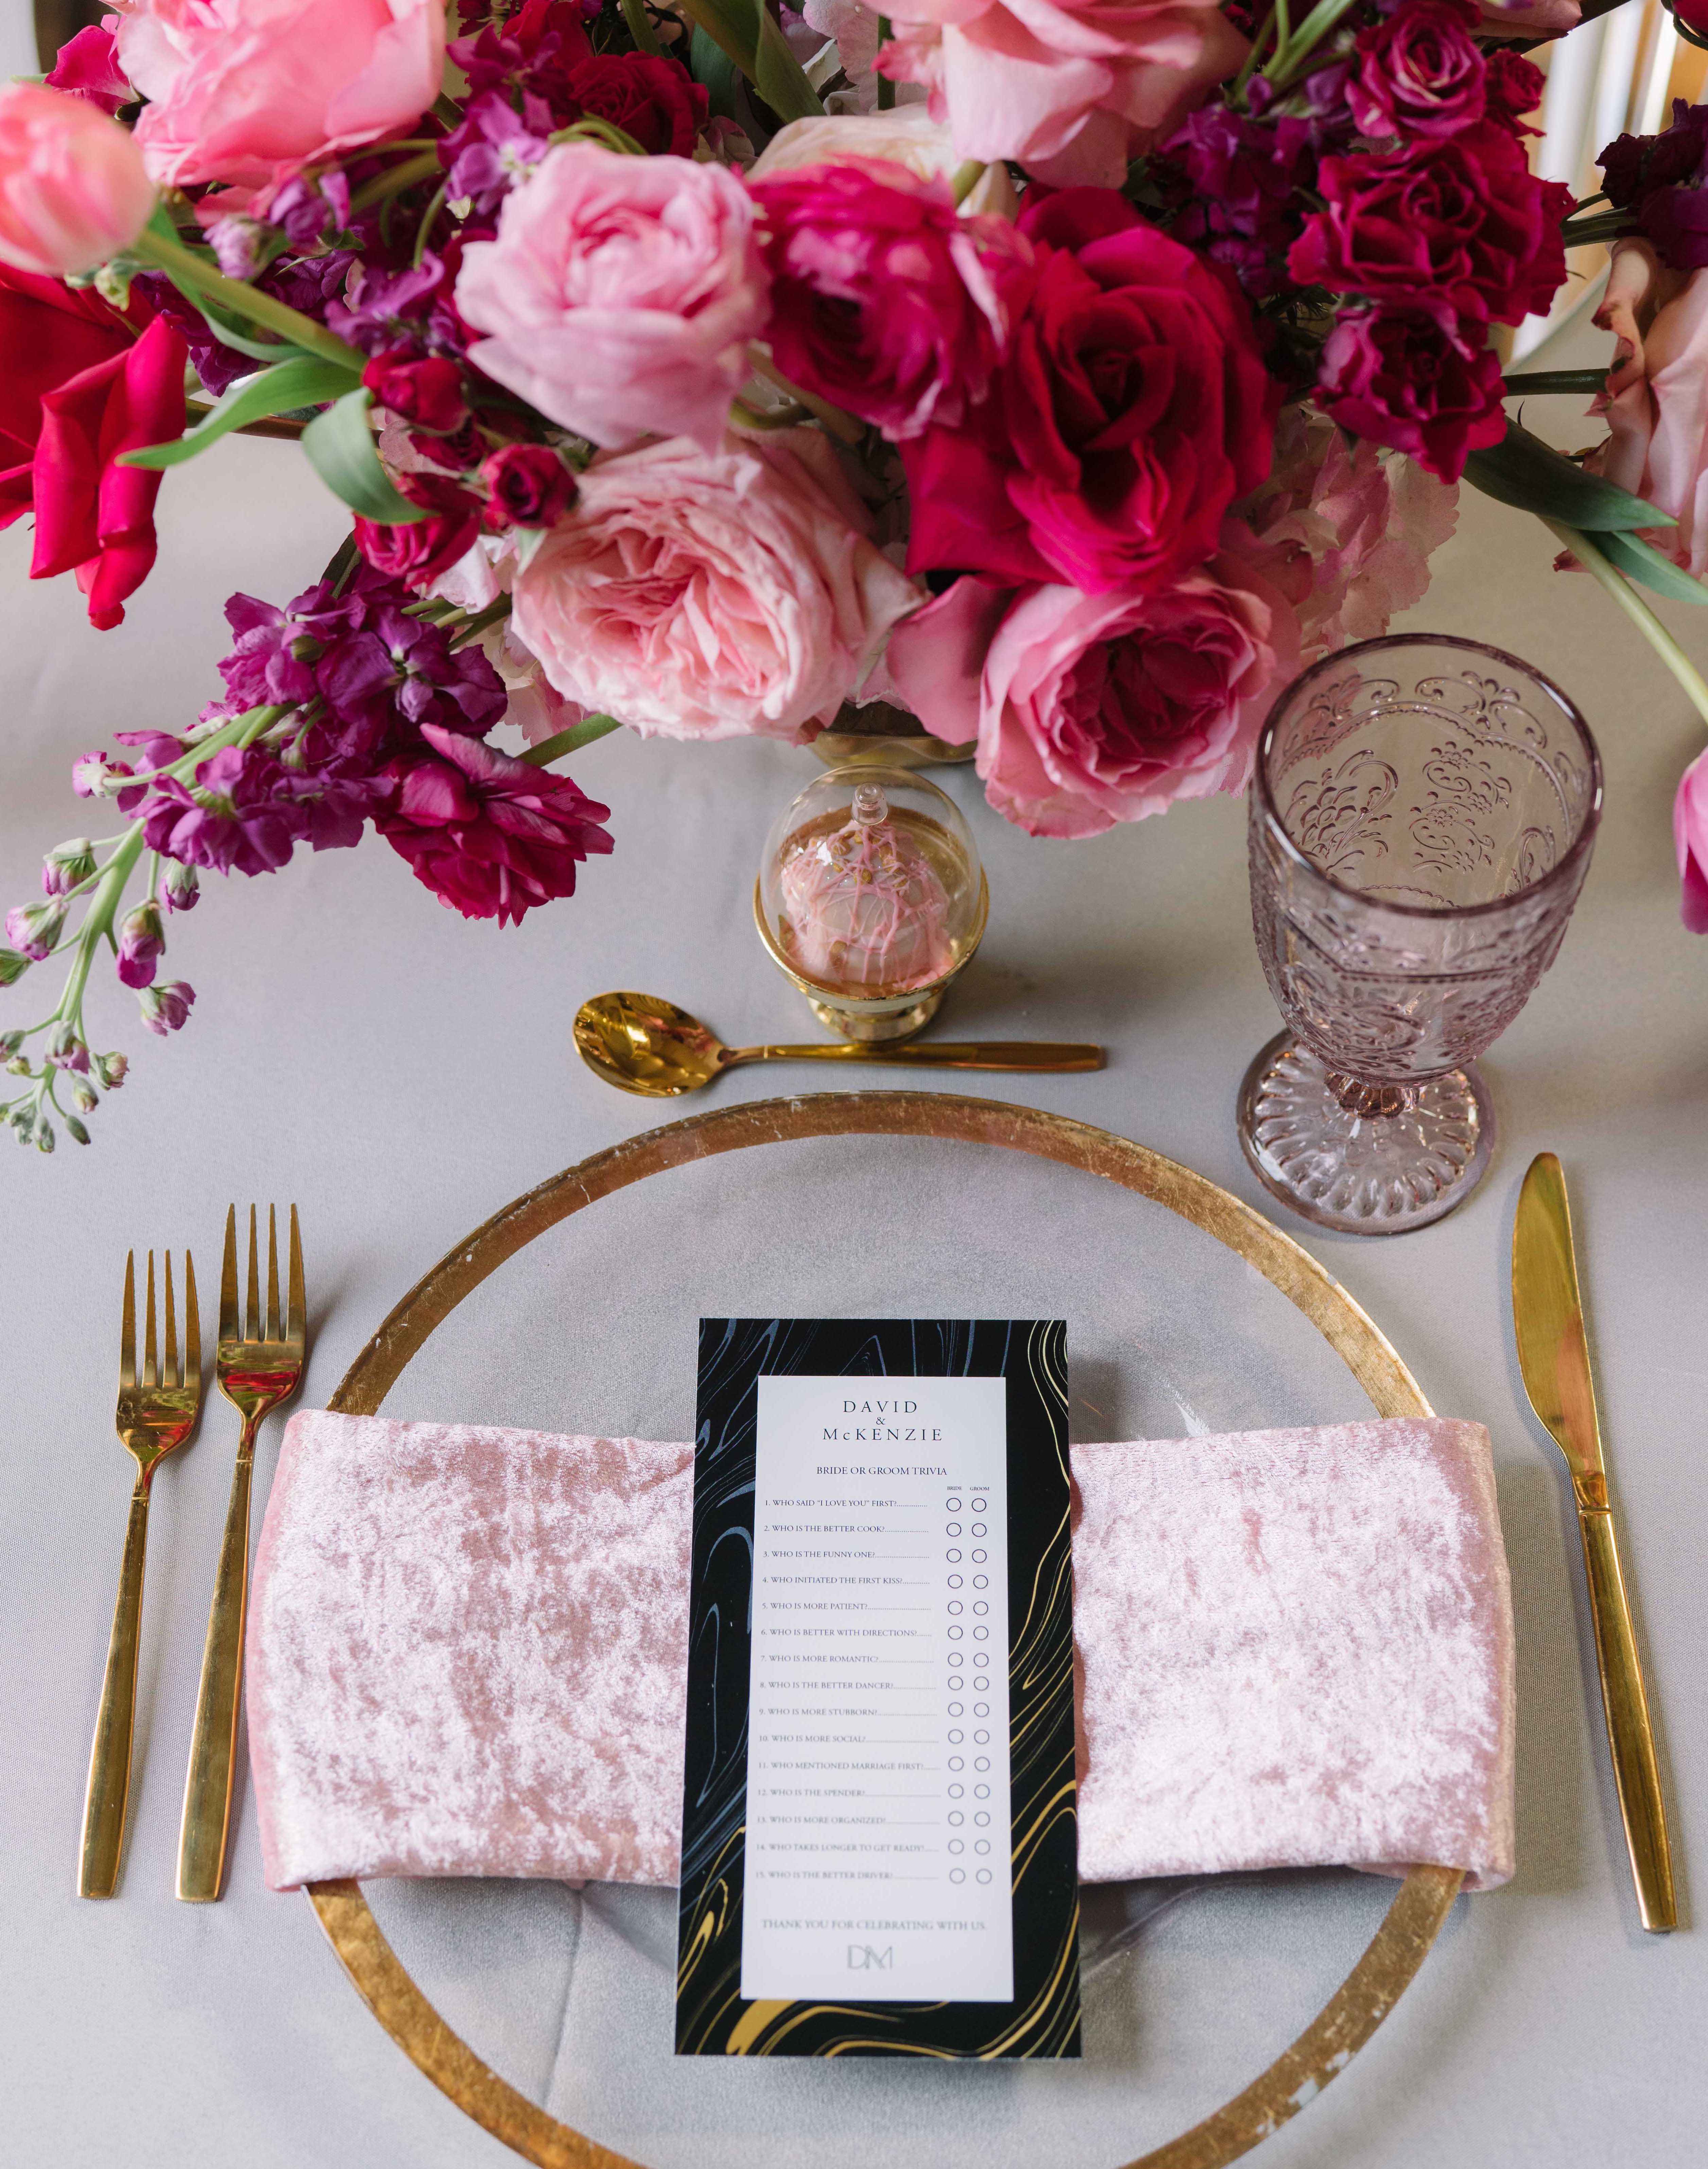 A wedding table setting with bright pink flowers and a velvet napkin for a Summer Wedding With a Vibrant Palette of Pink.